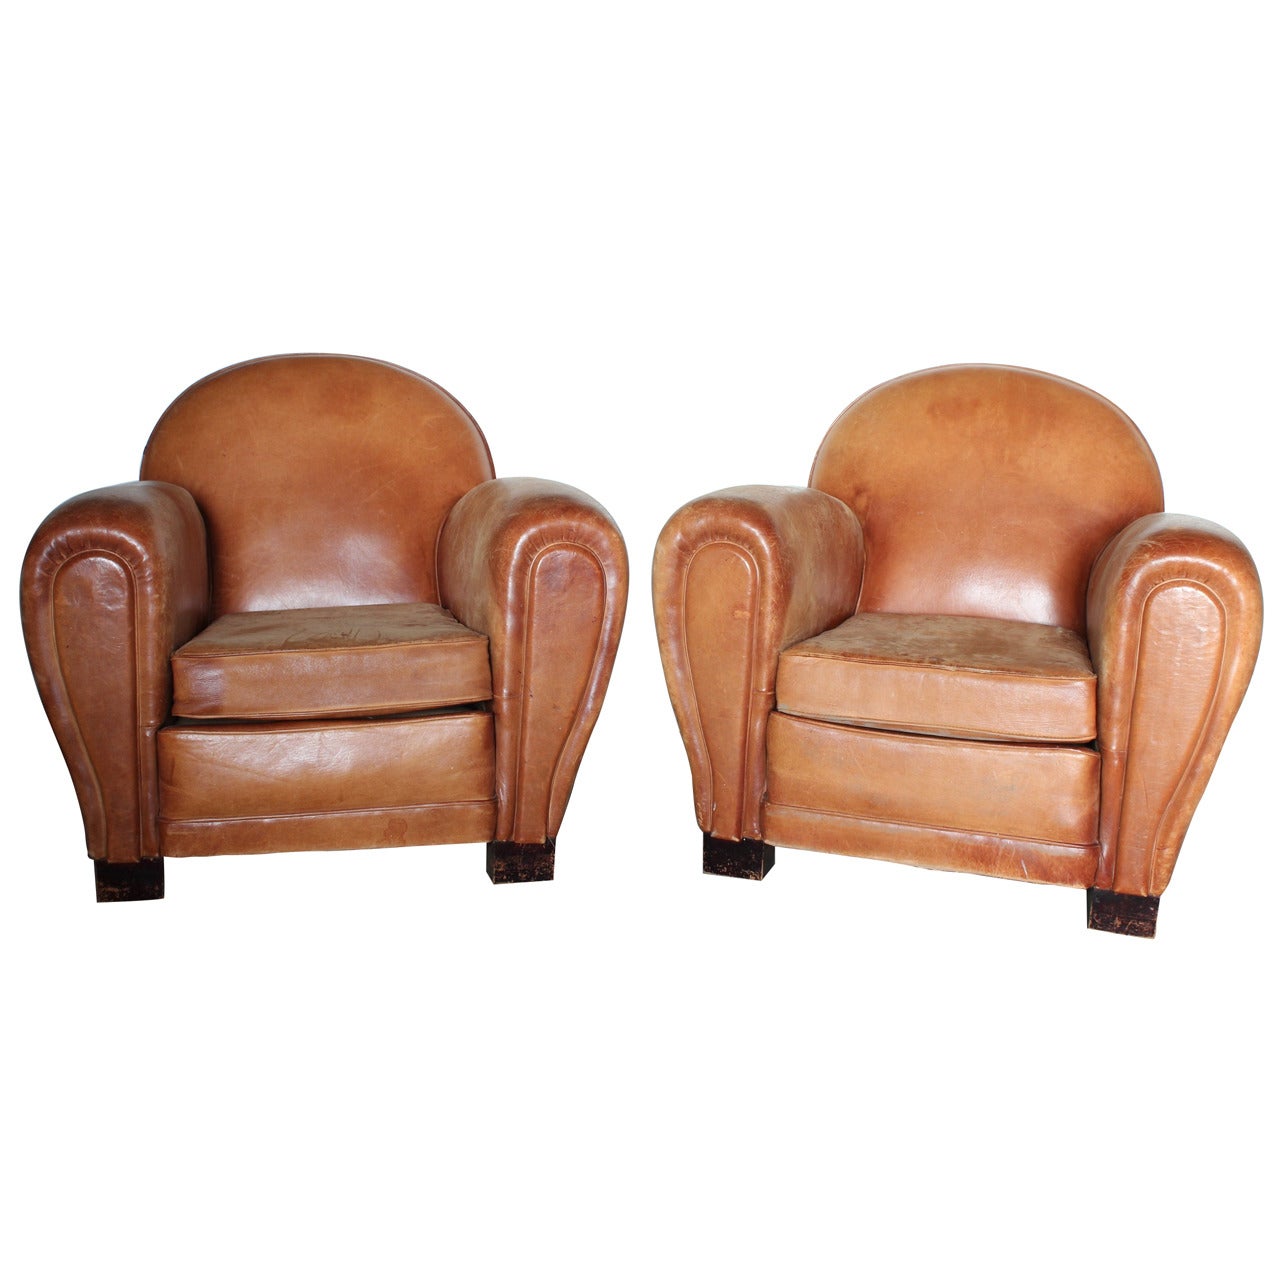 1930's French Leather Club Chairs